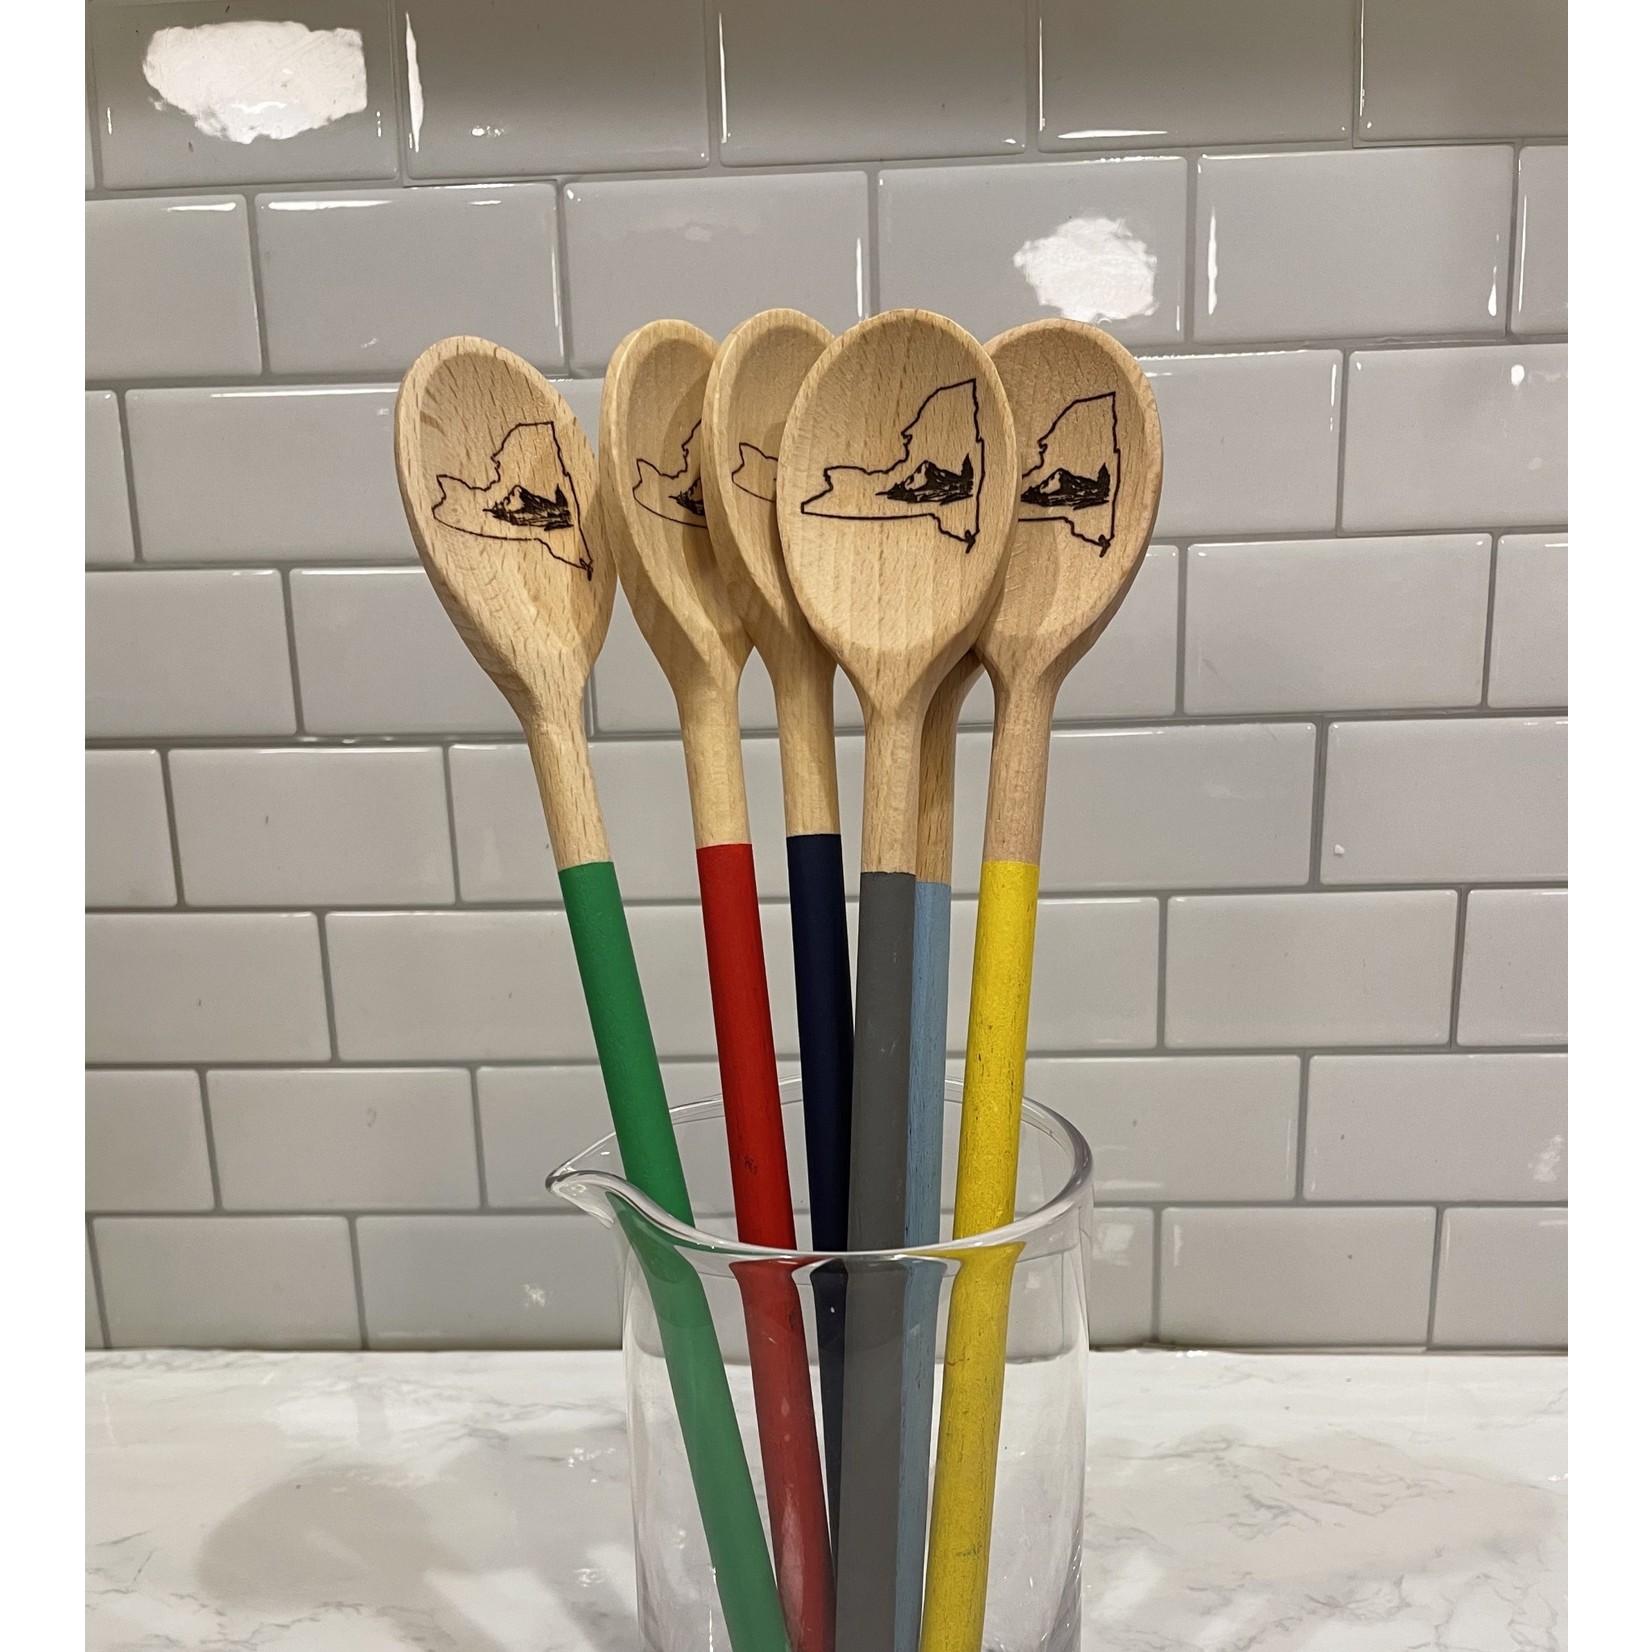 New York Wooden Spoon Collection